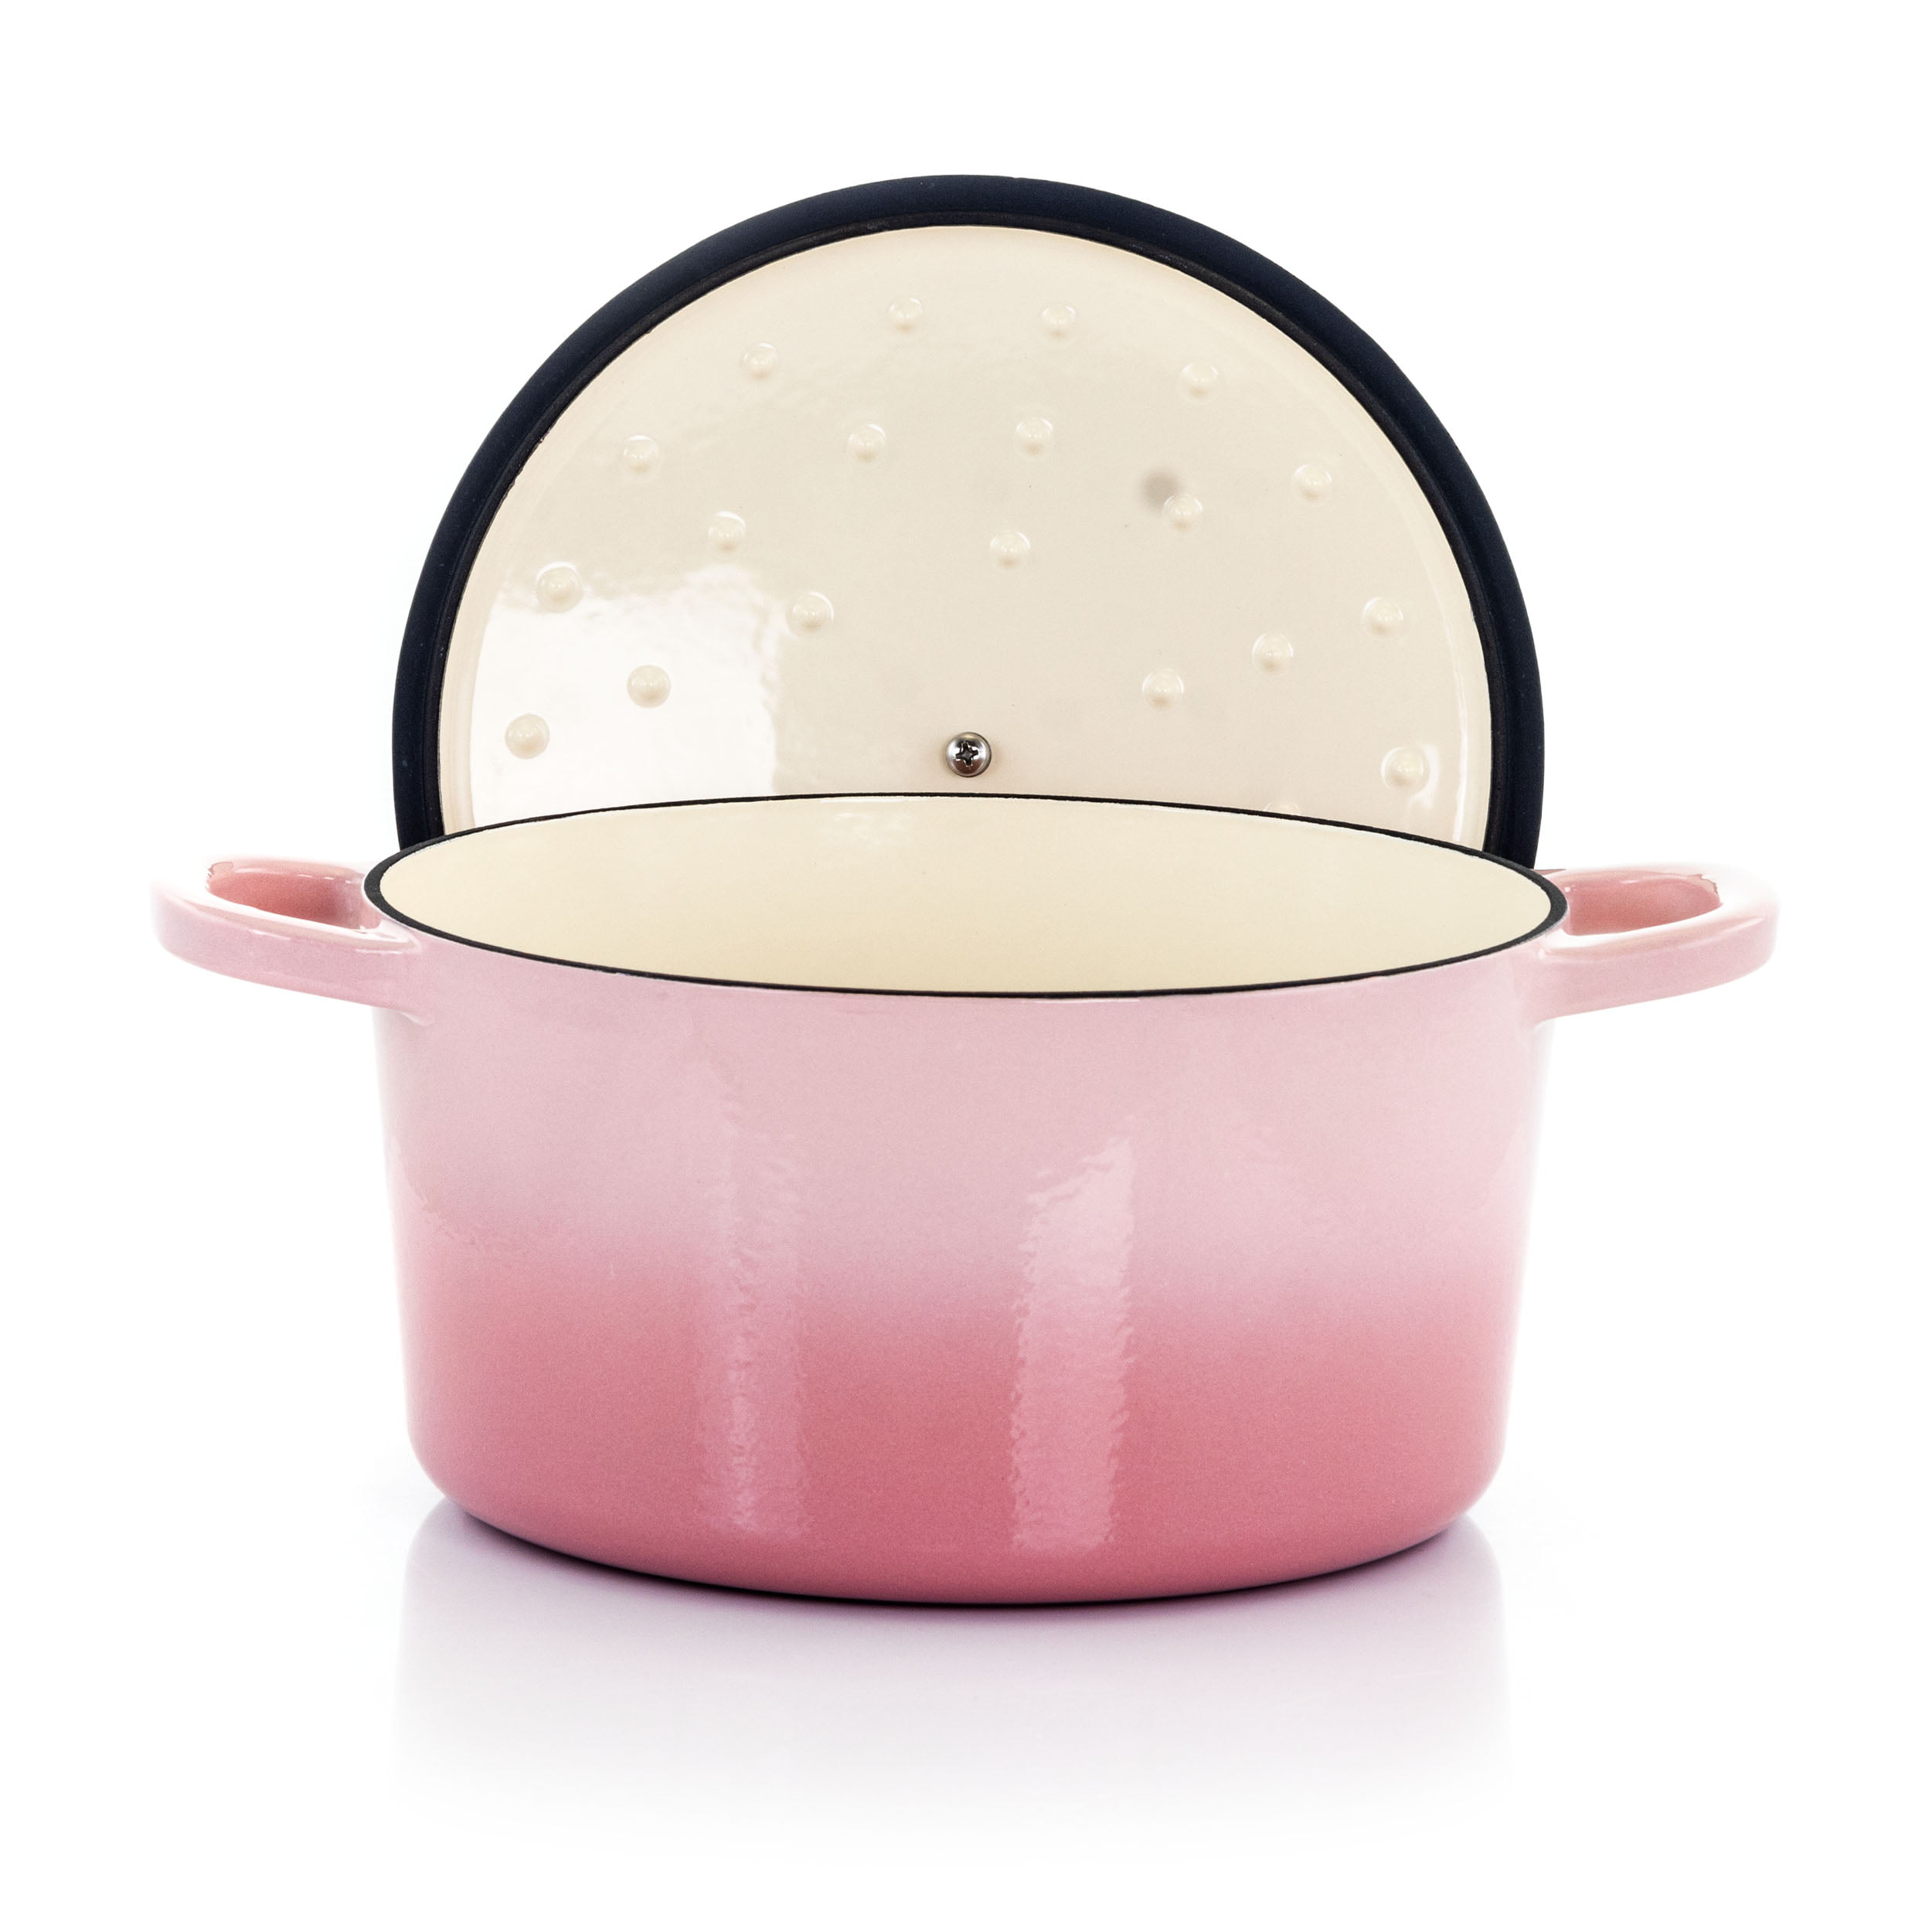 Crock-Pot Artisan 7 Quart Enamled Cast Iron Dutch Oven in Blush Pink -  Dishwasher Safe - Oven Safe in the Cooking Pots department at